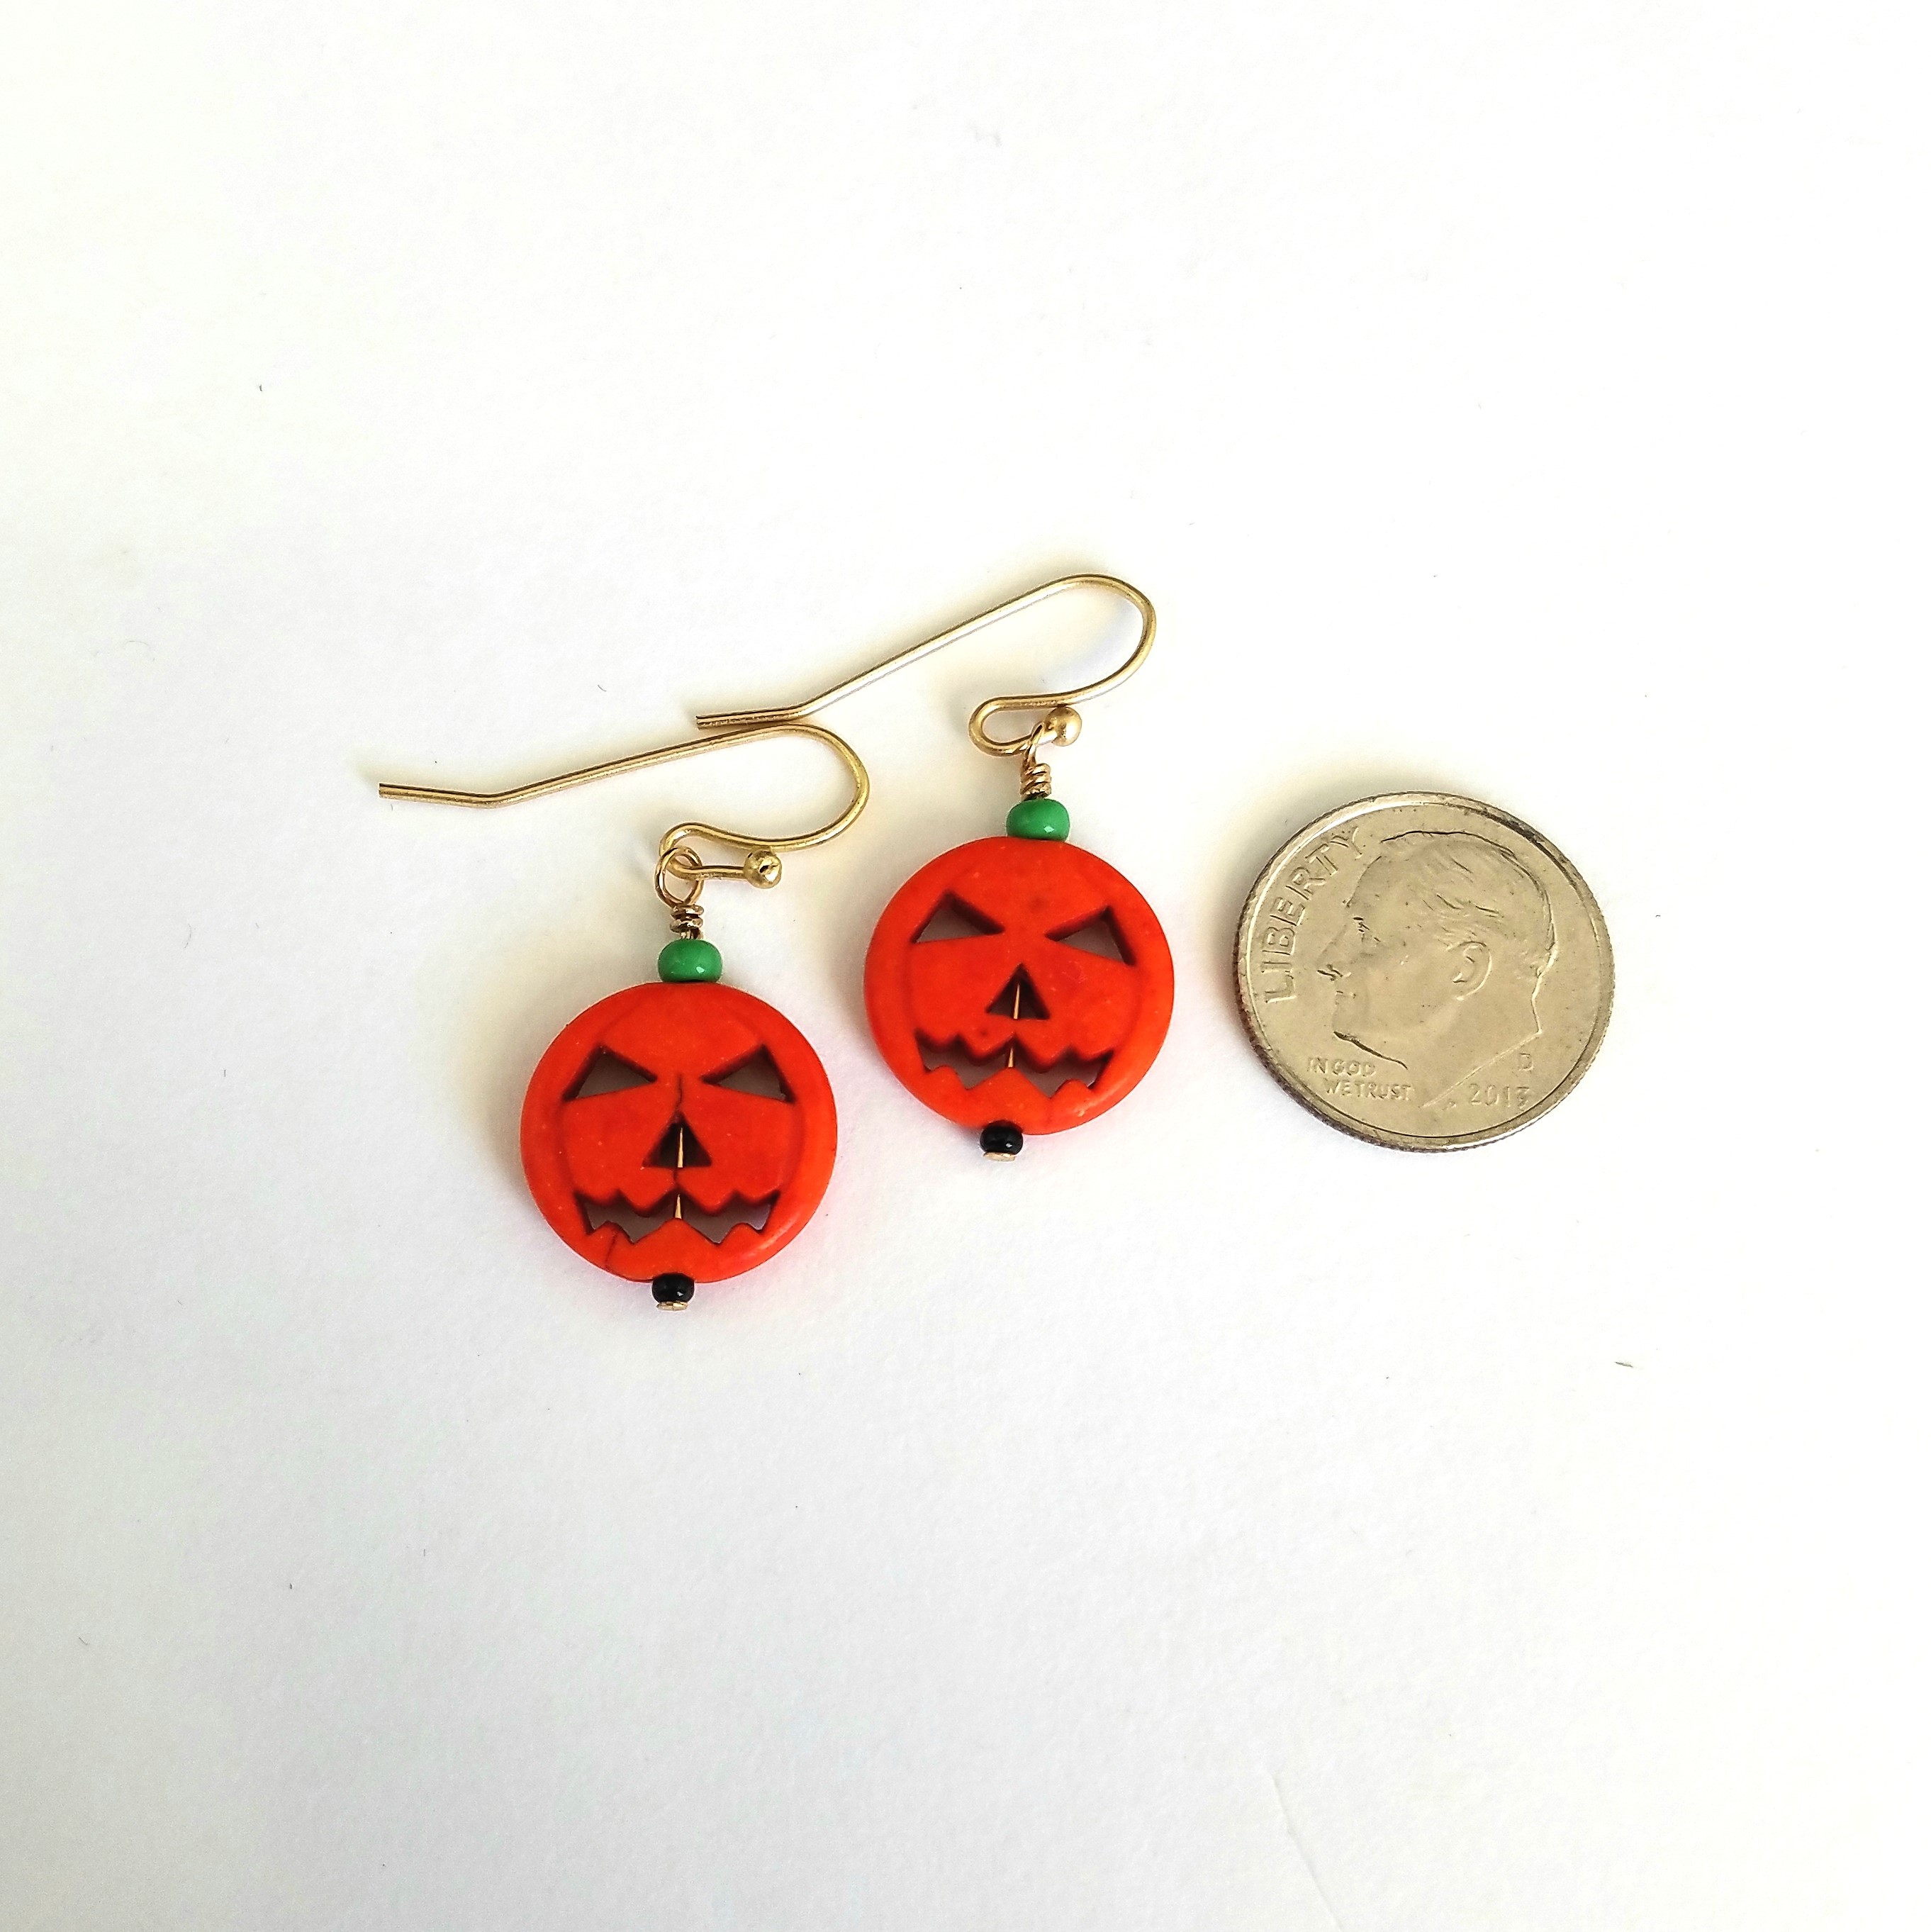 Halloween Crystal beads Earrings, Witchy Crystal Jewelry Earrings